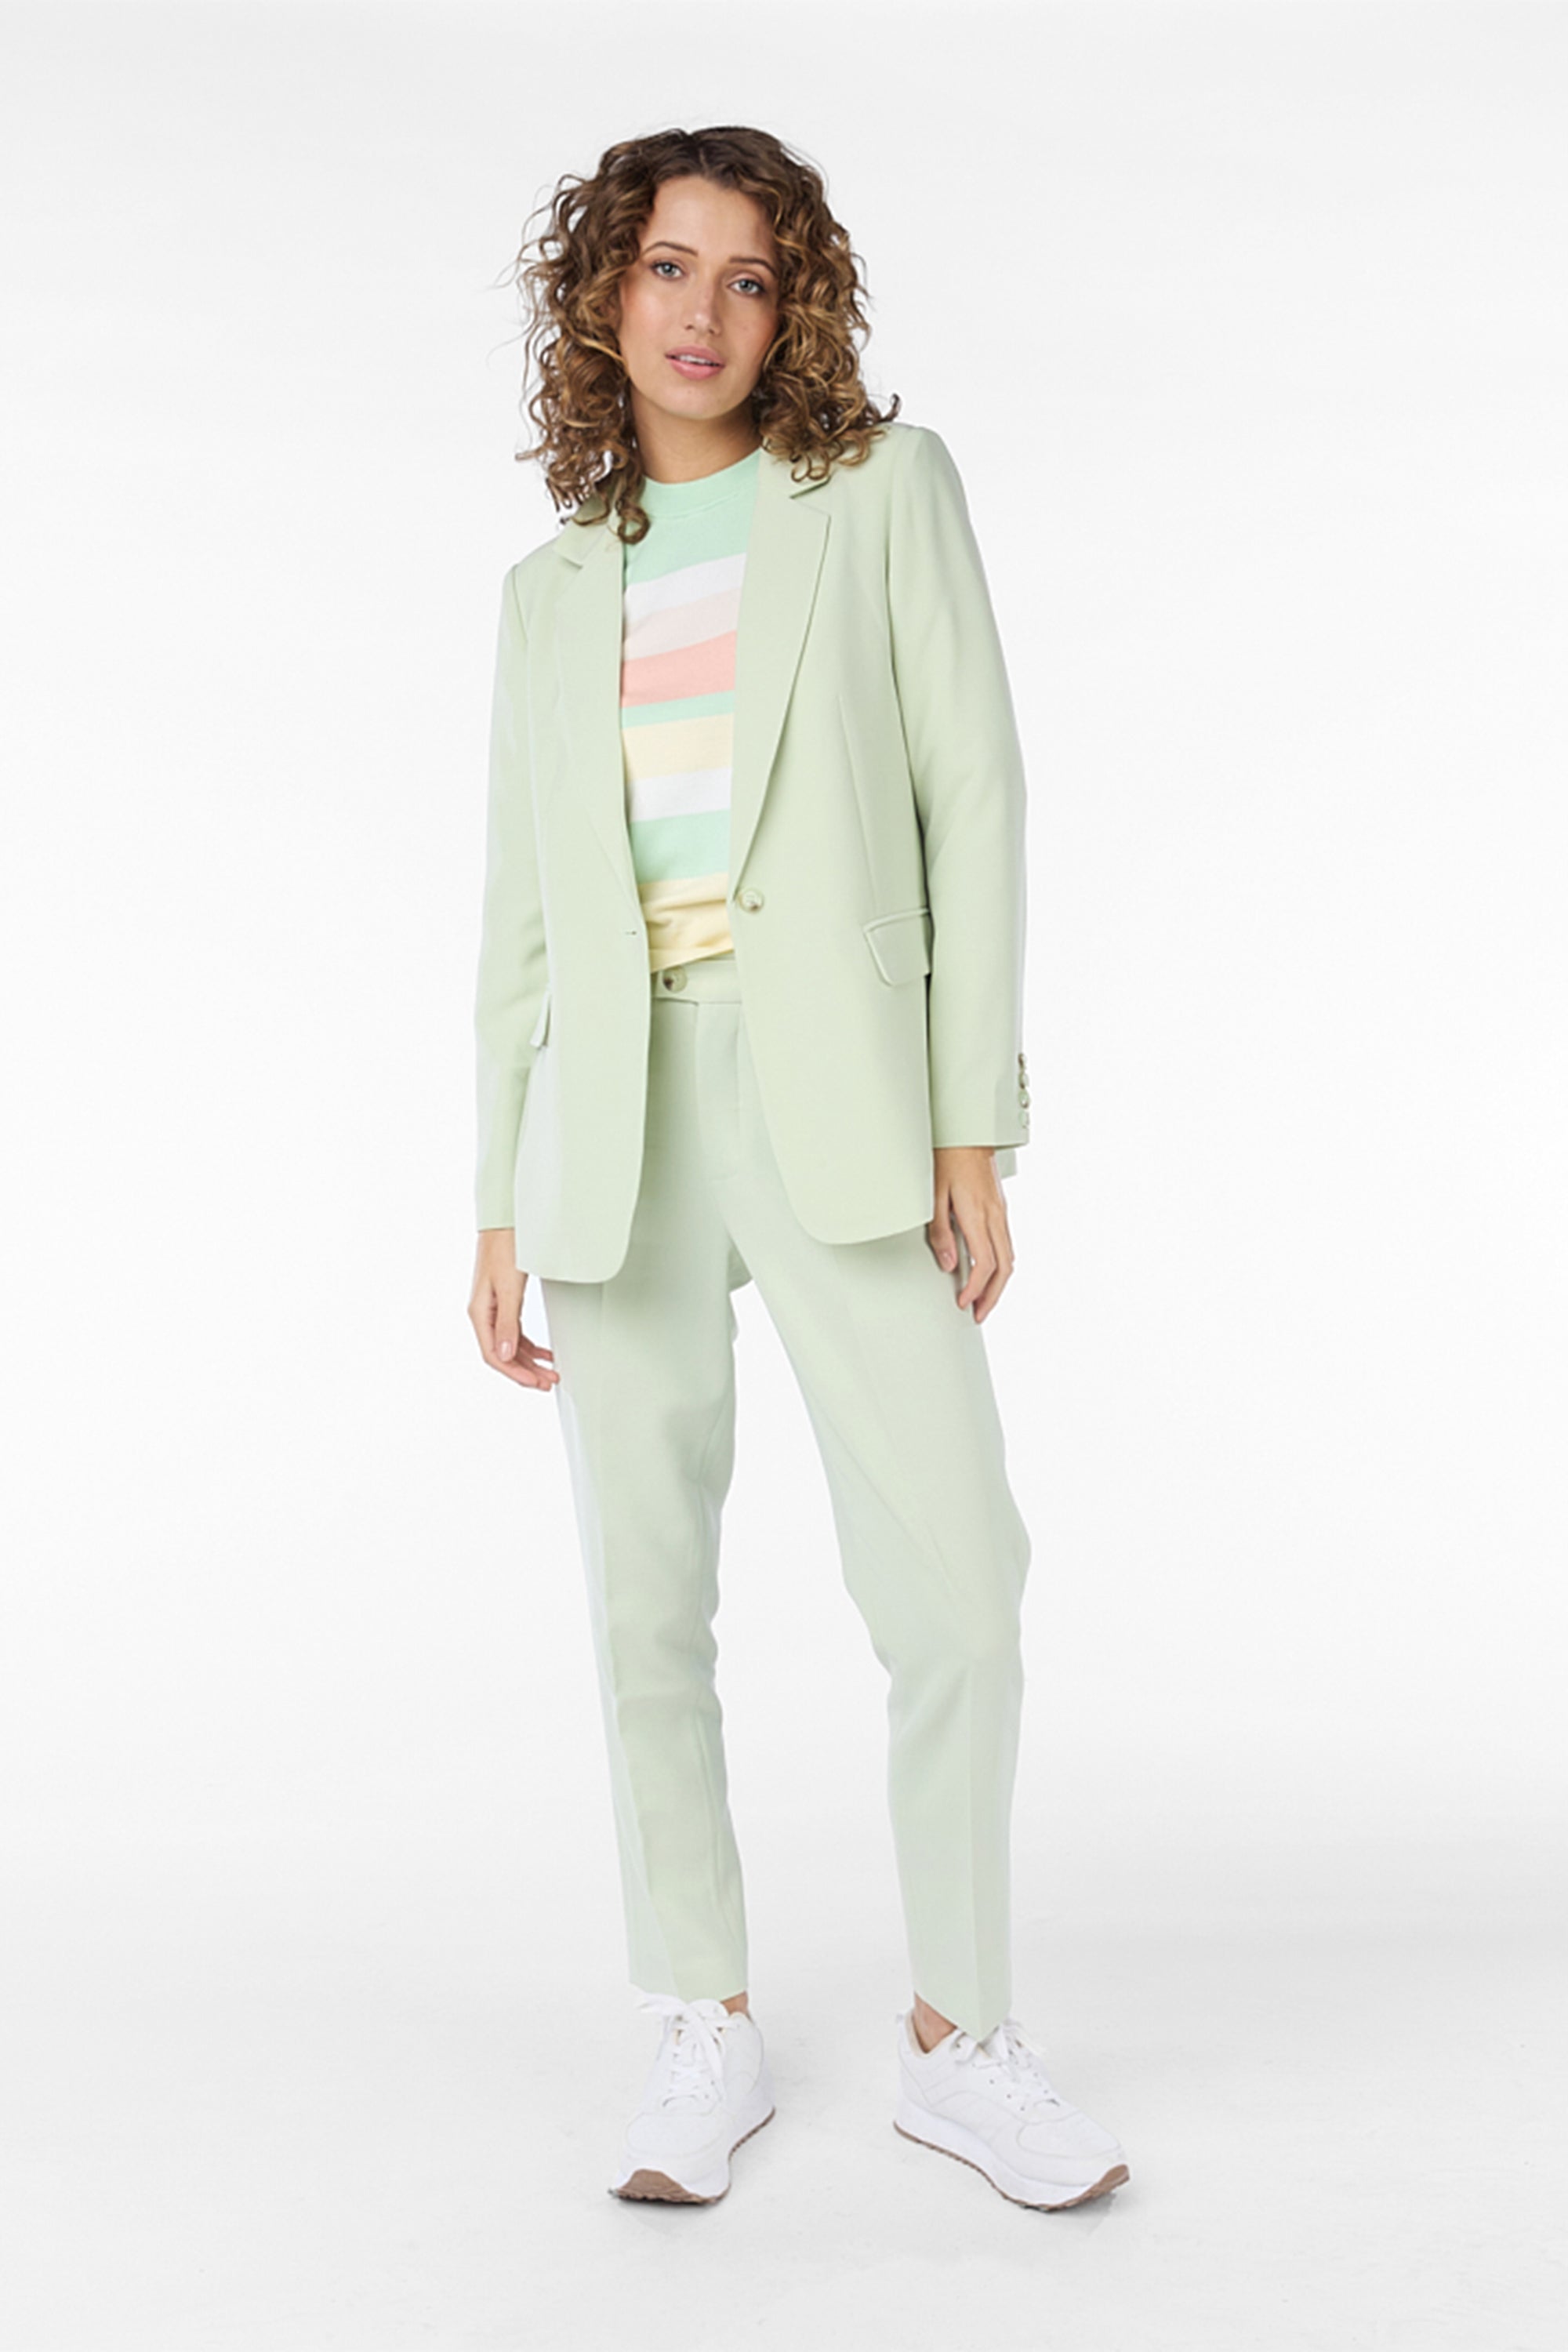 Full body front view of Esqualo (SP2410022) Women's Long Sleeve Tailored Blazer with Notch Collar, Single Button Close, and Front Pockets in Pistachio green